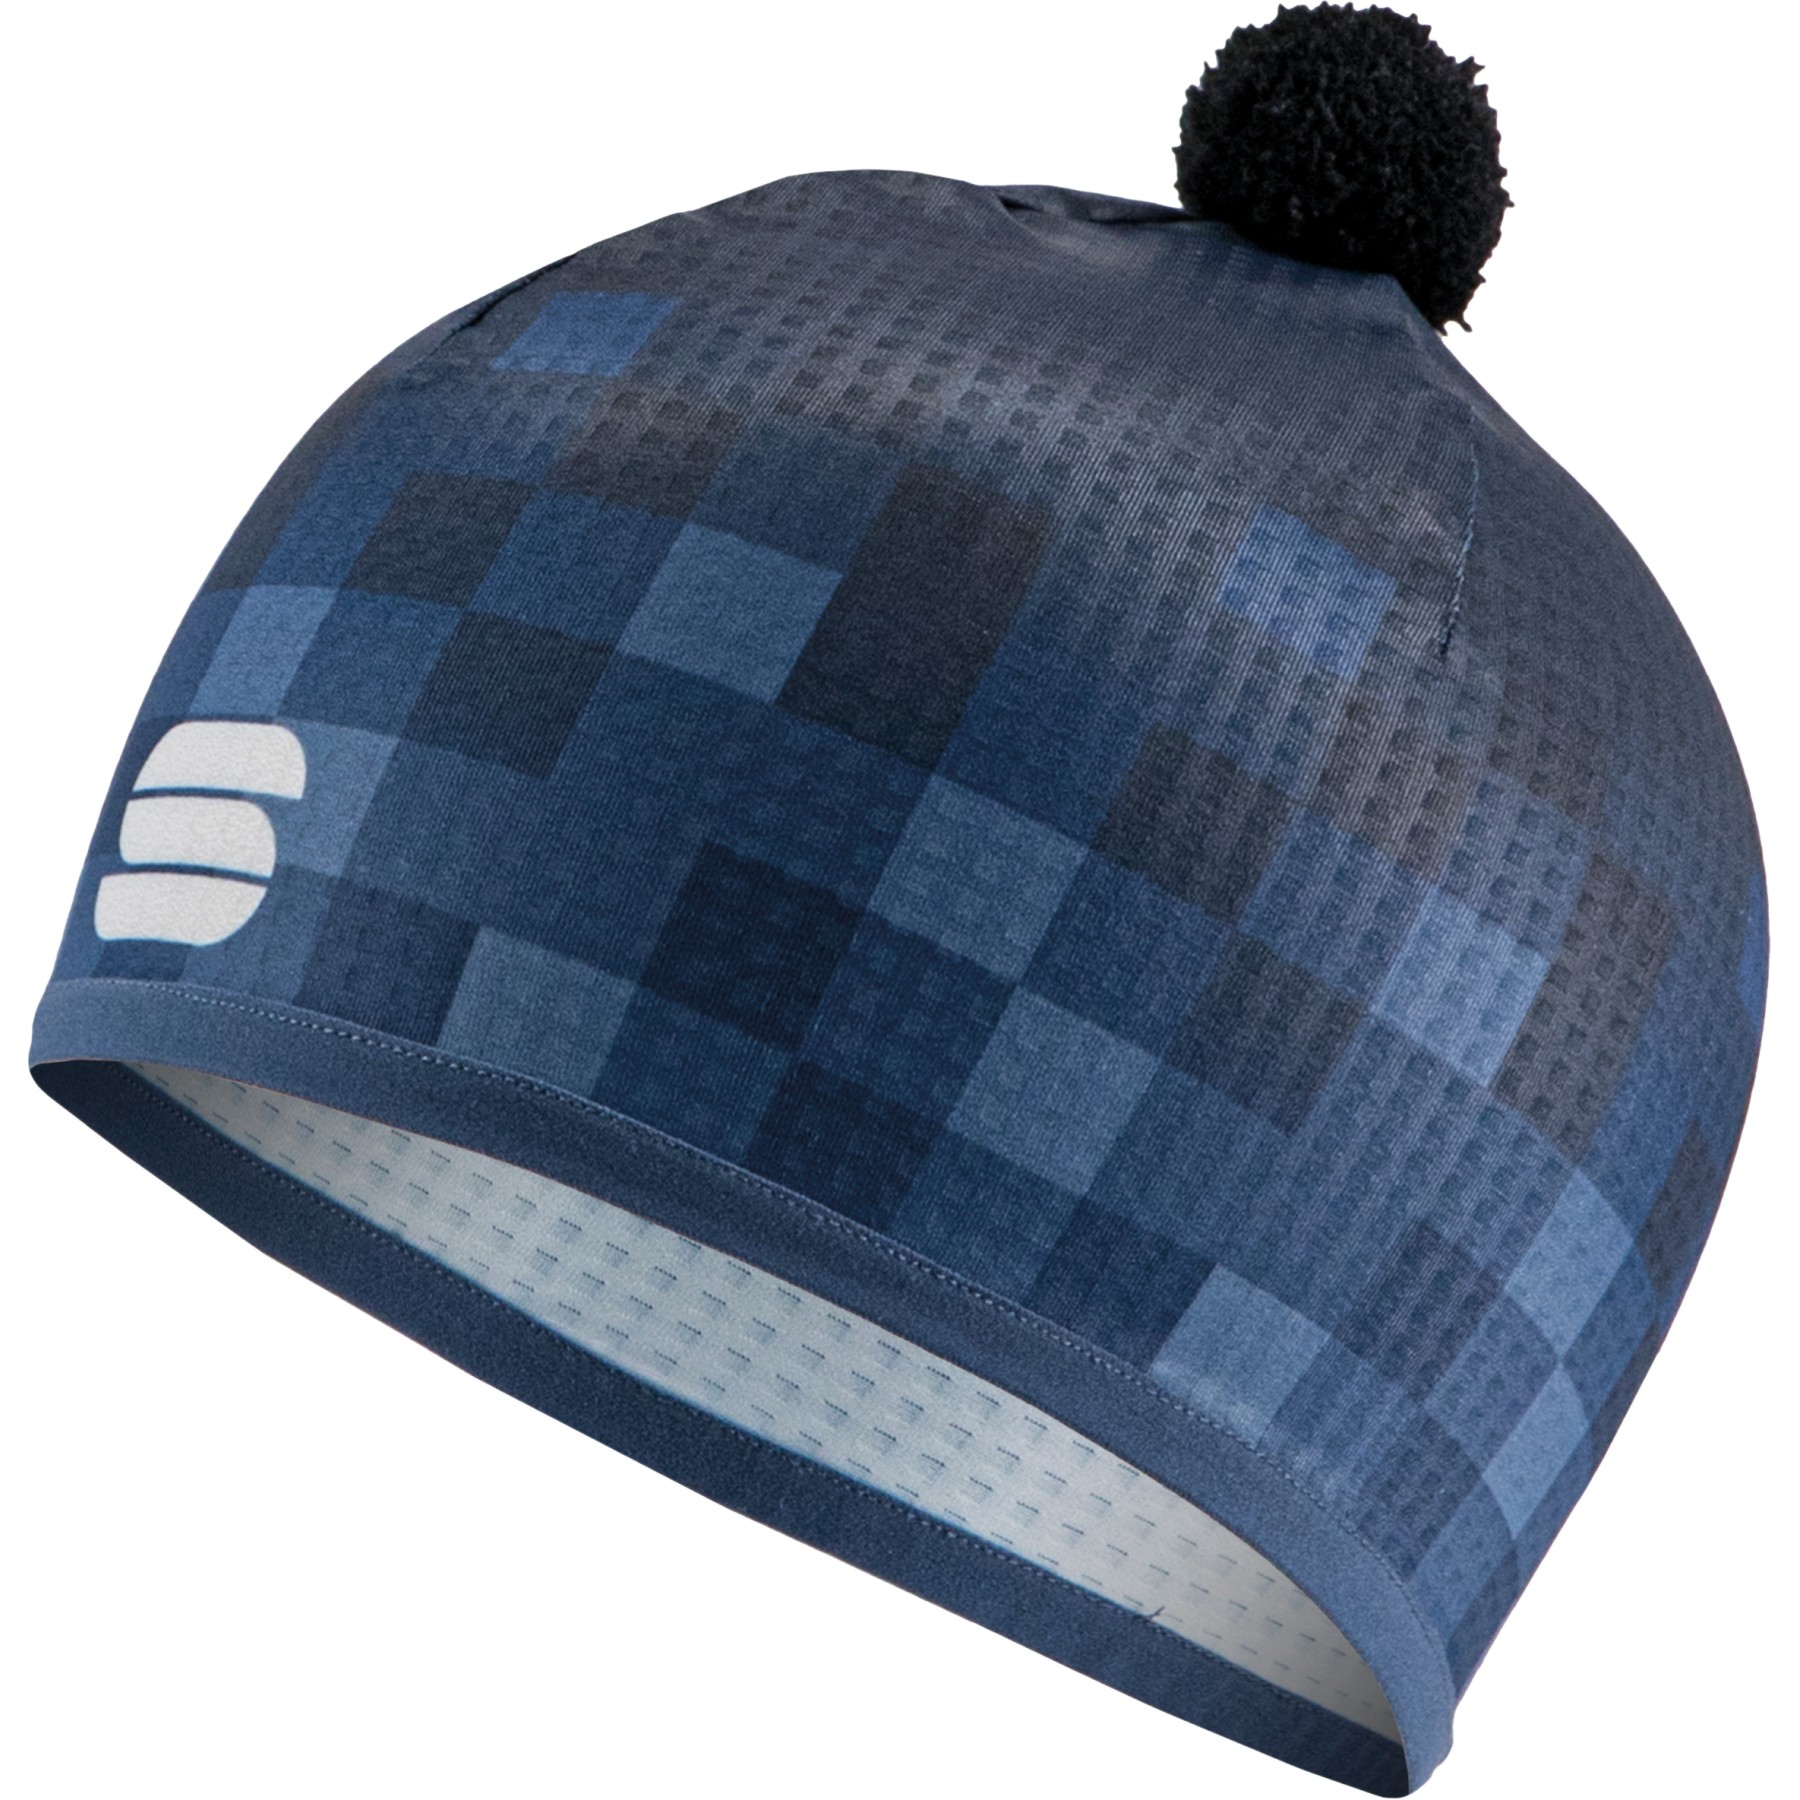 Picture of Sportful Squadra Light Hat - 456 Galaxy Blue/Blue See